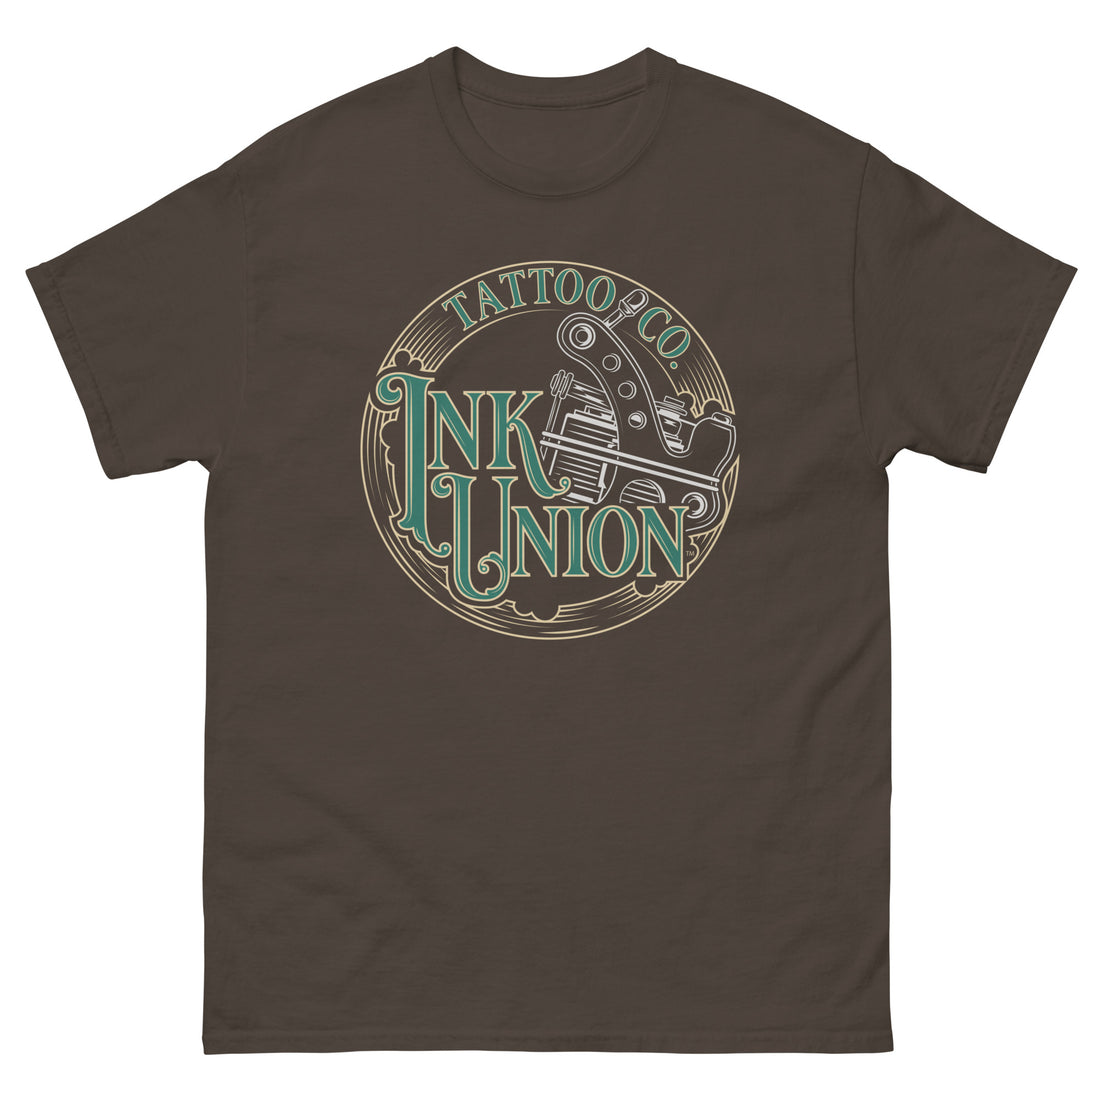 A brown t-shirt adorned with the Ink Union Tattoo Co. green and gold with a silver tattoo machine logo.